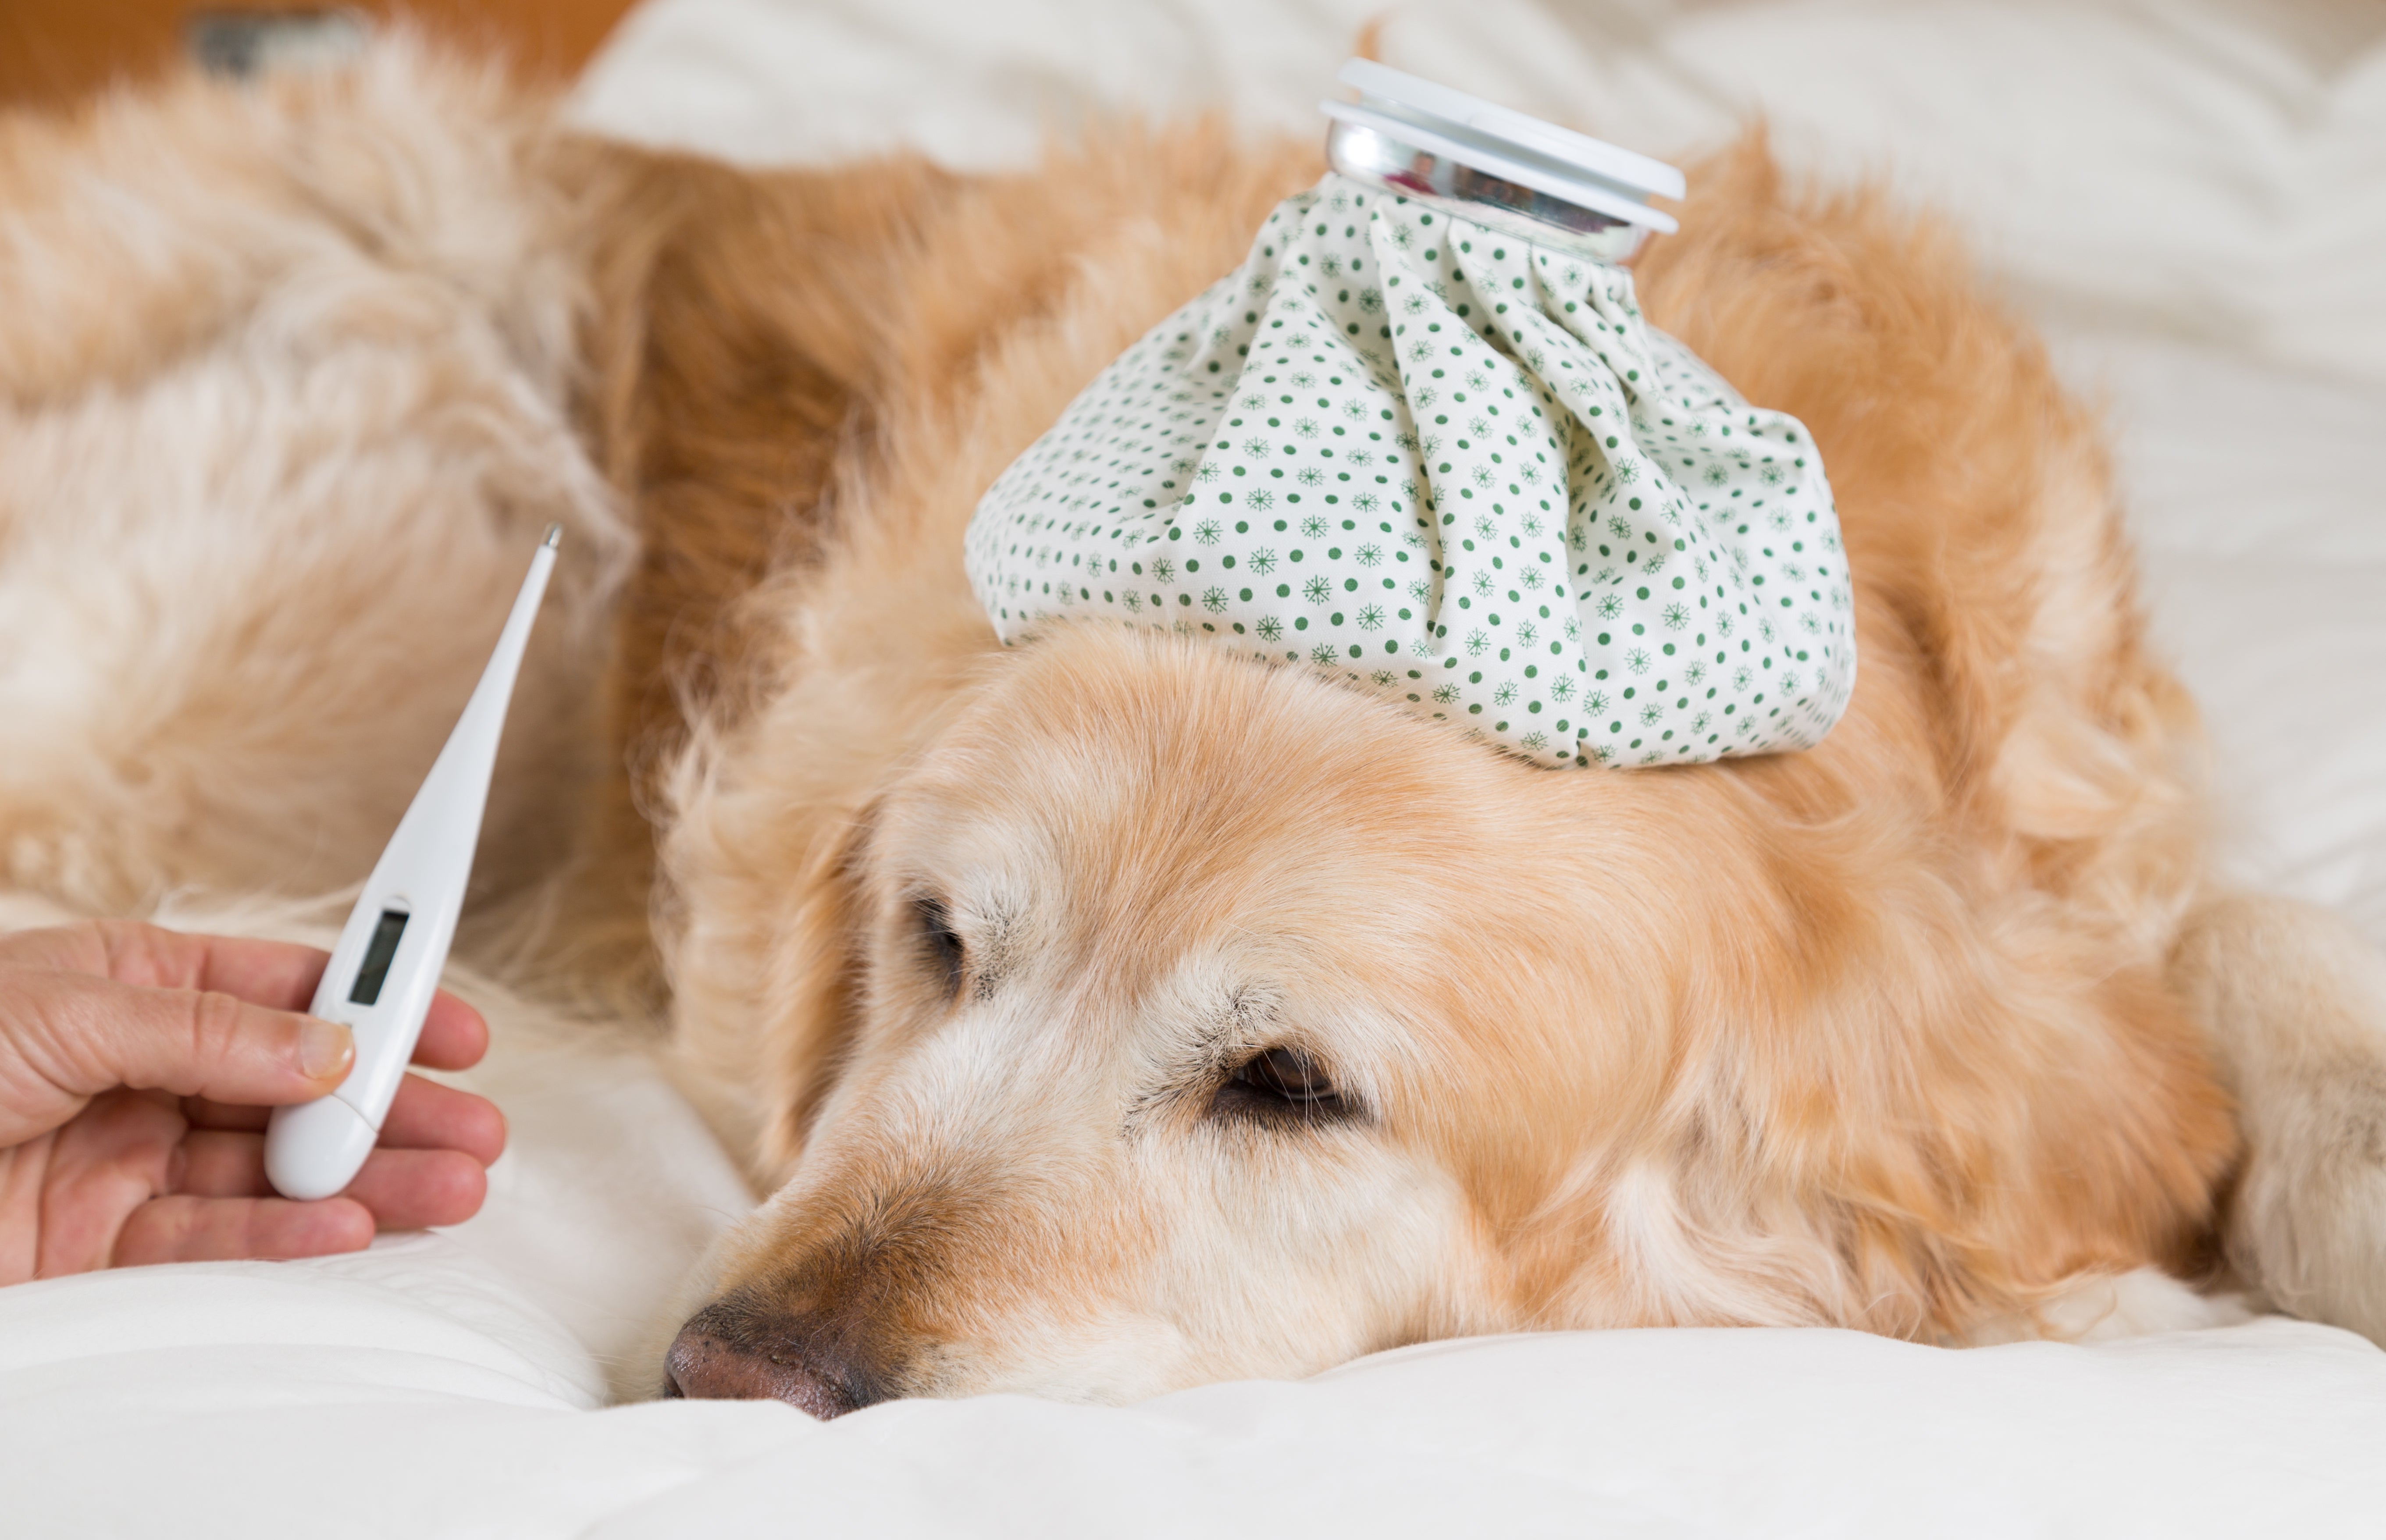 what is a dangerous fever for a dog